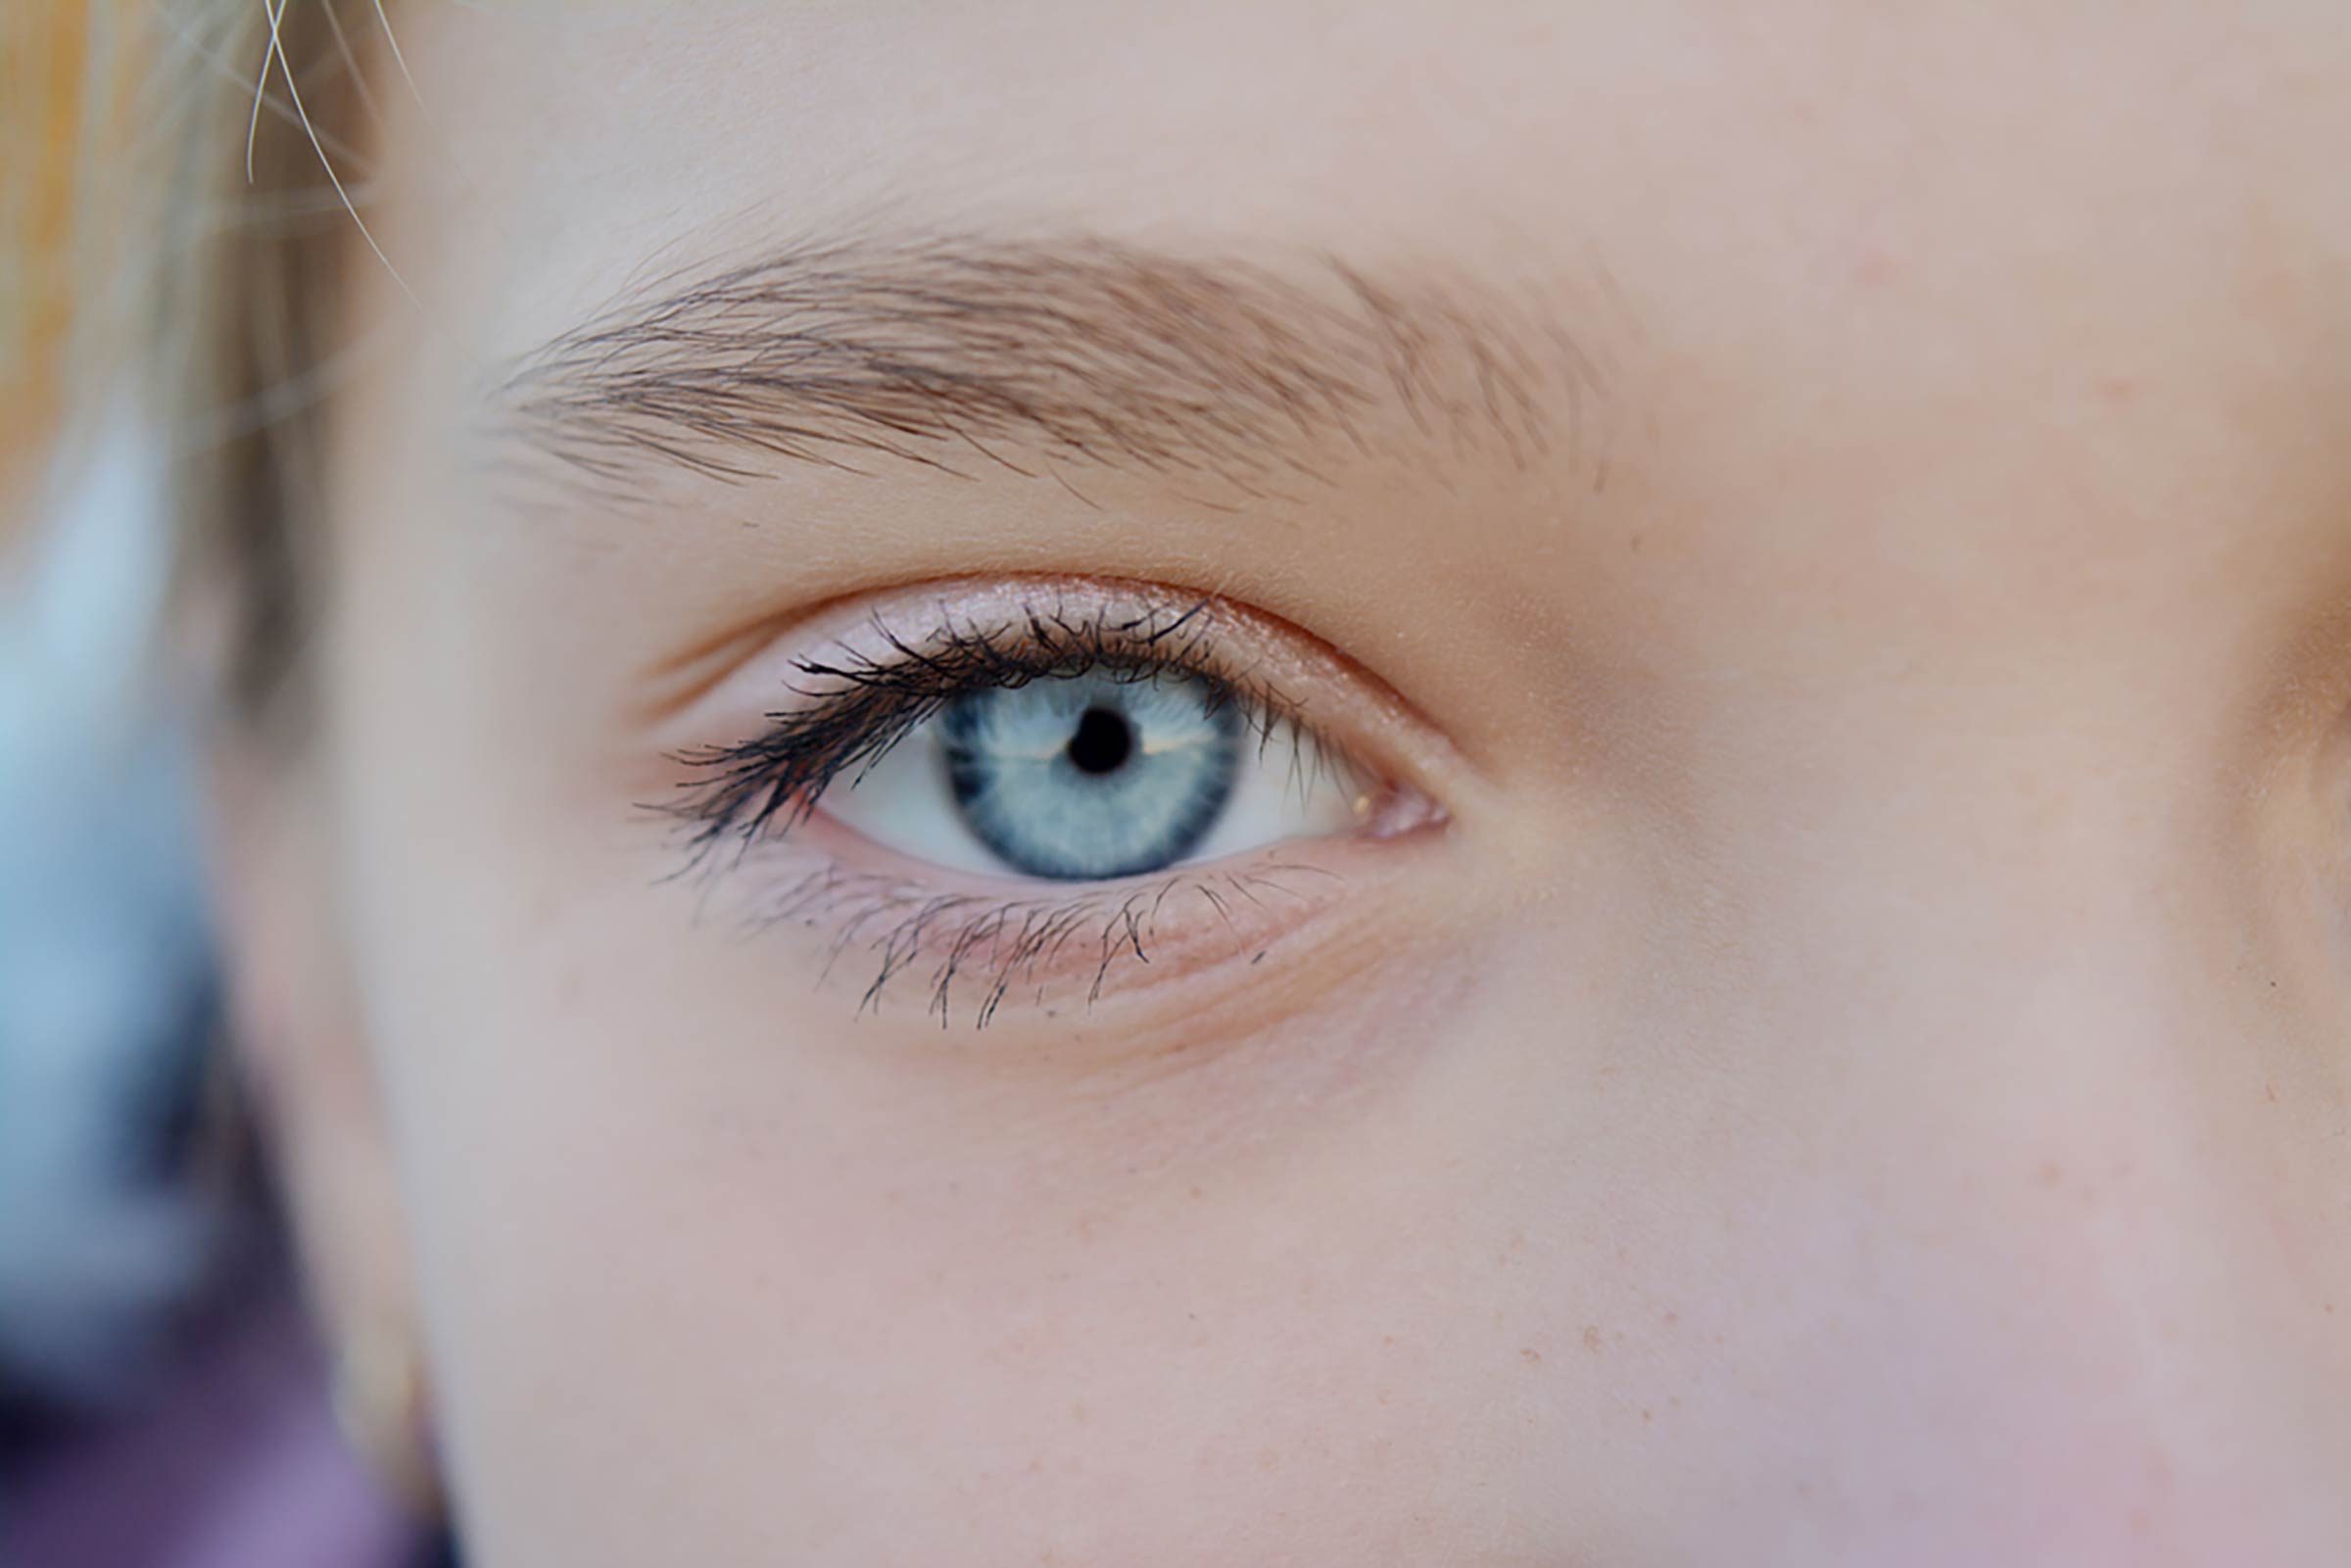 https://www.thehealthy.com/wp-content/uploads/2023/02/Why-Everyone-With-Blue-Eyes-Is-Related-_529573849-Radka-Strouhalova.jpg?fit=700,467